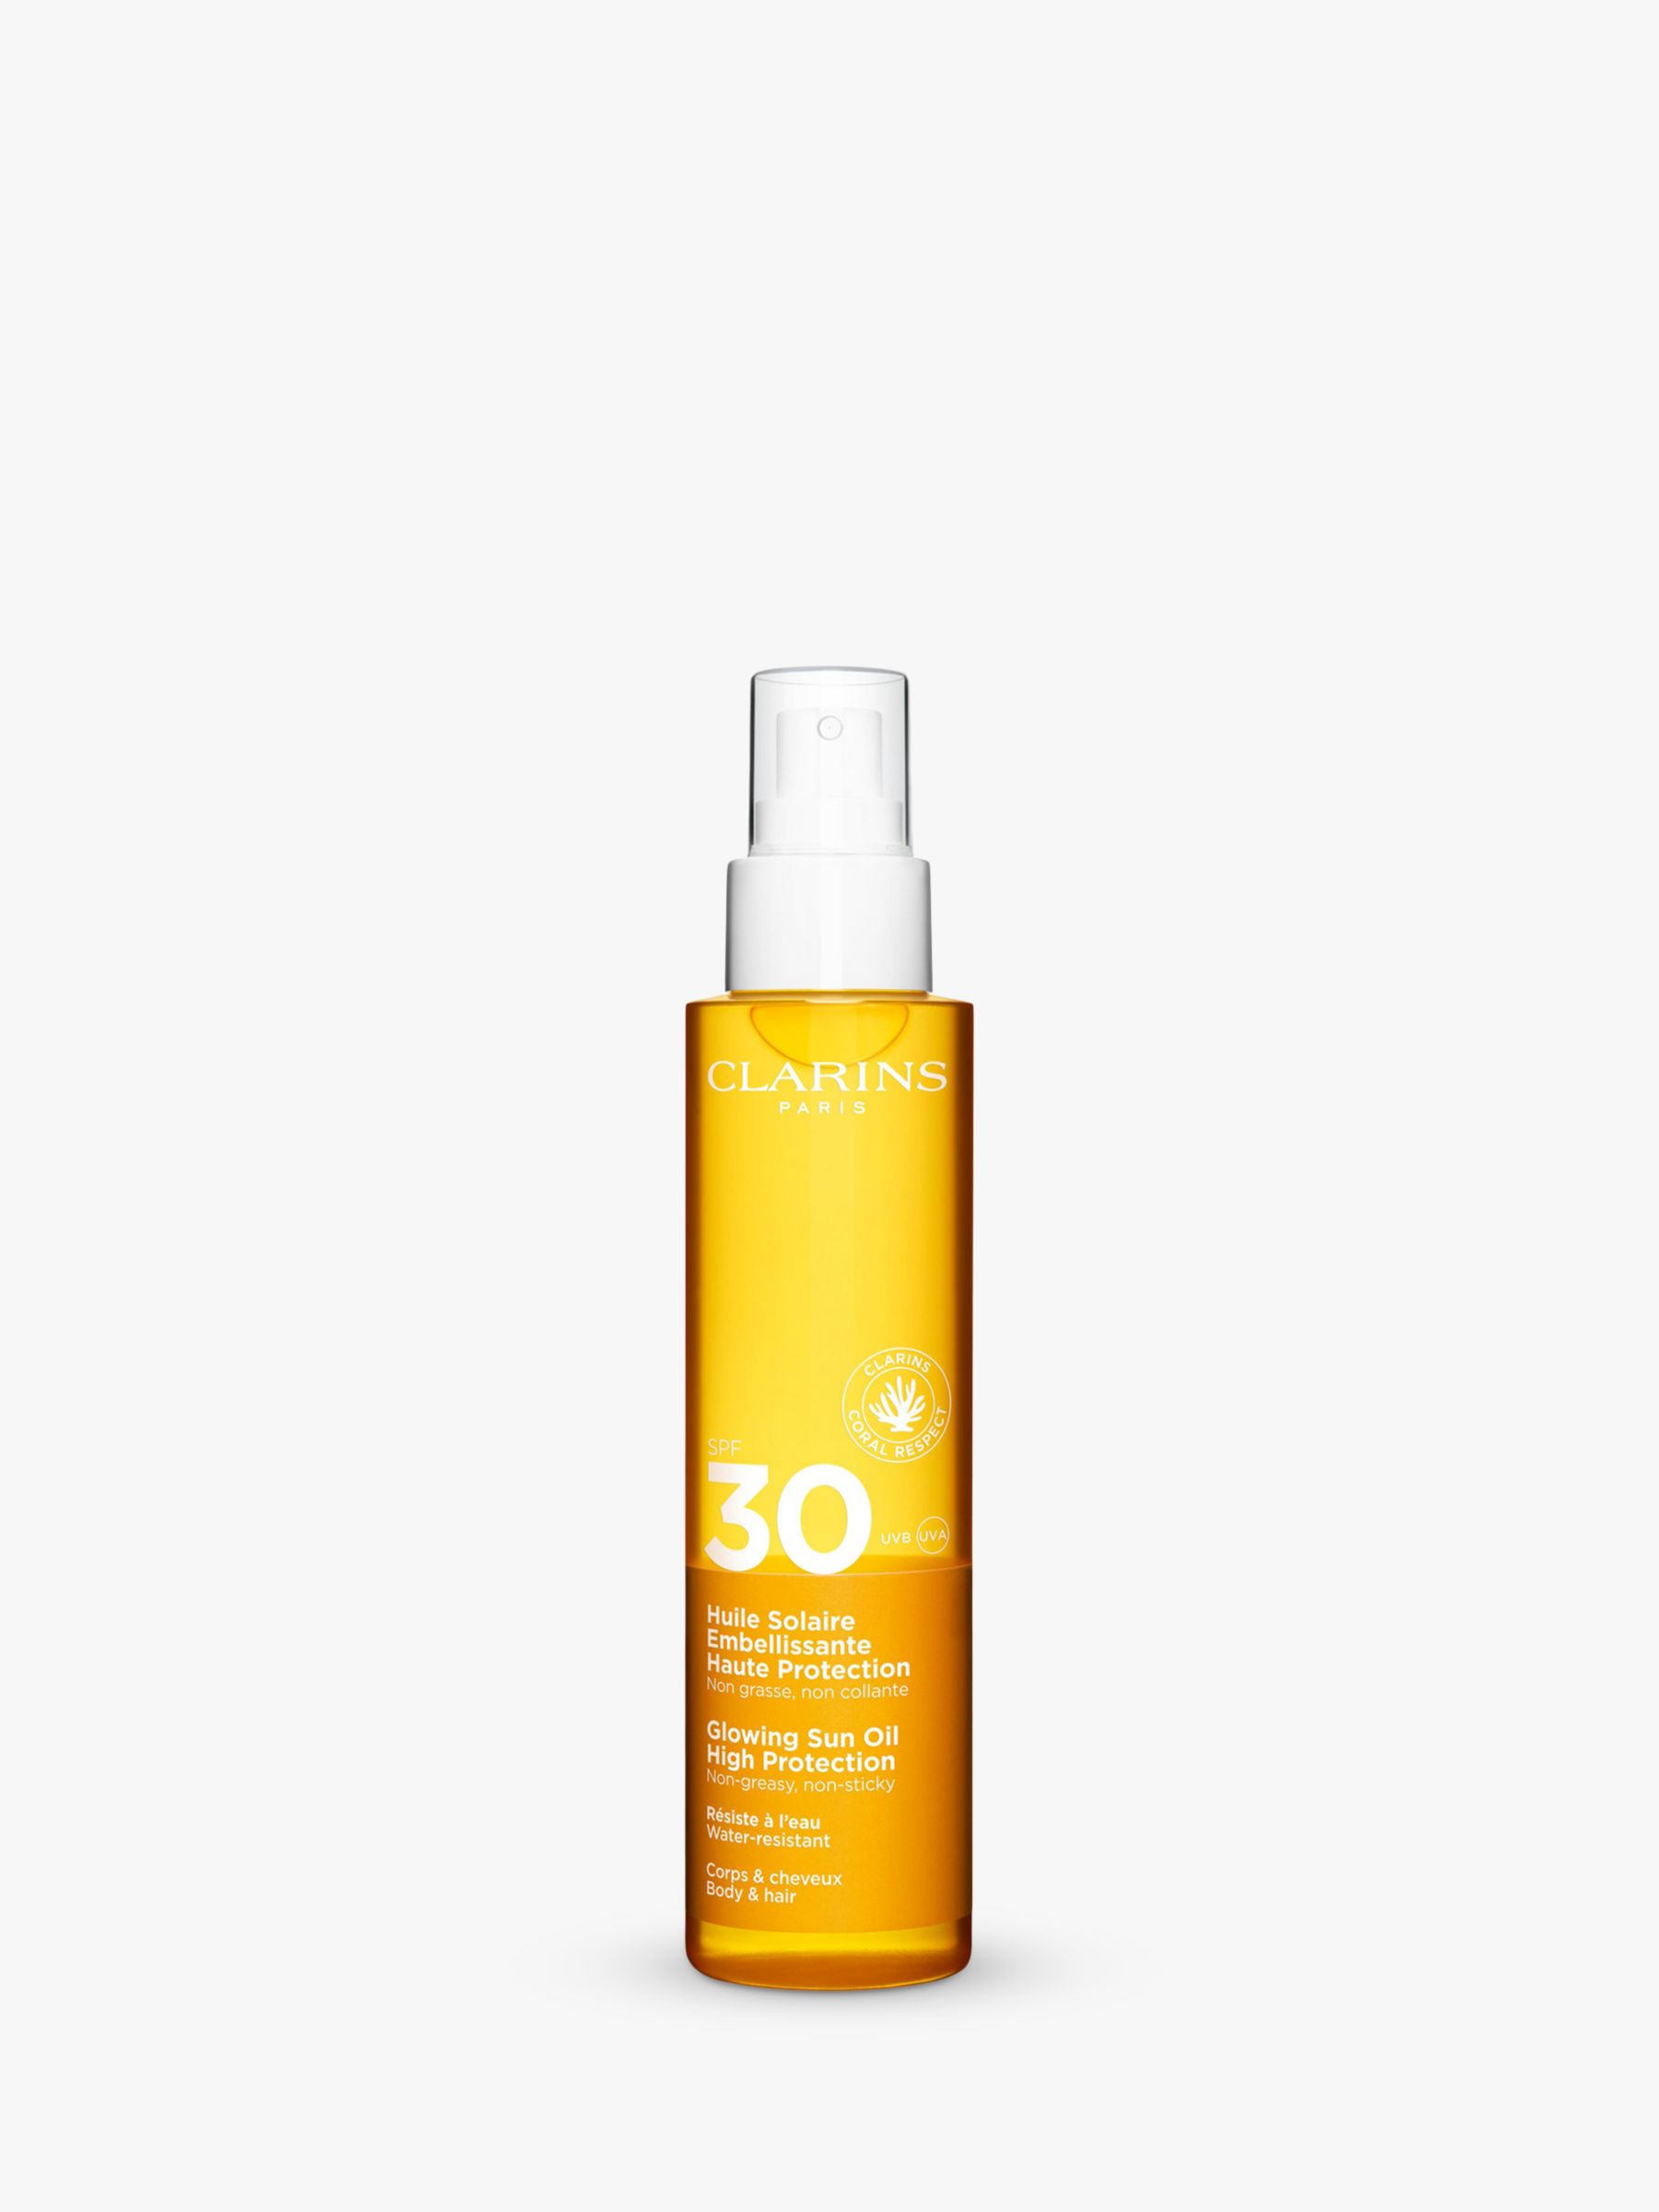 Clarins Glowing Sun Oil High Protection SPF 30, 150ml 1